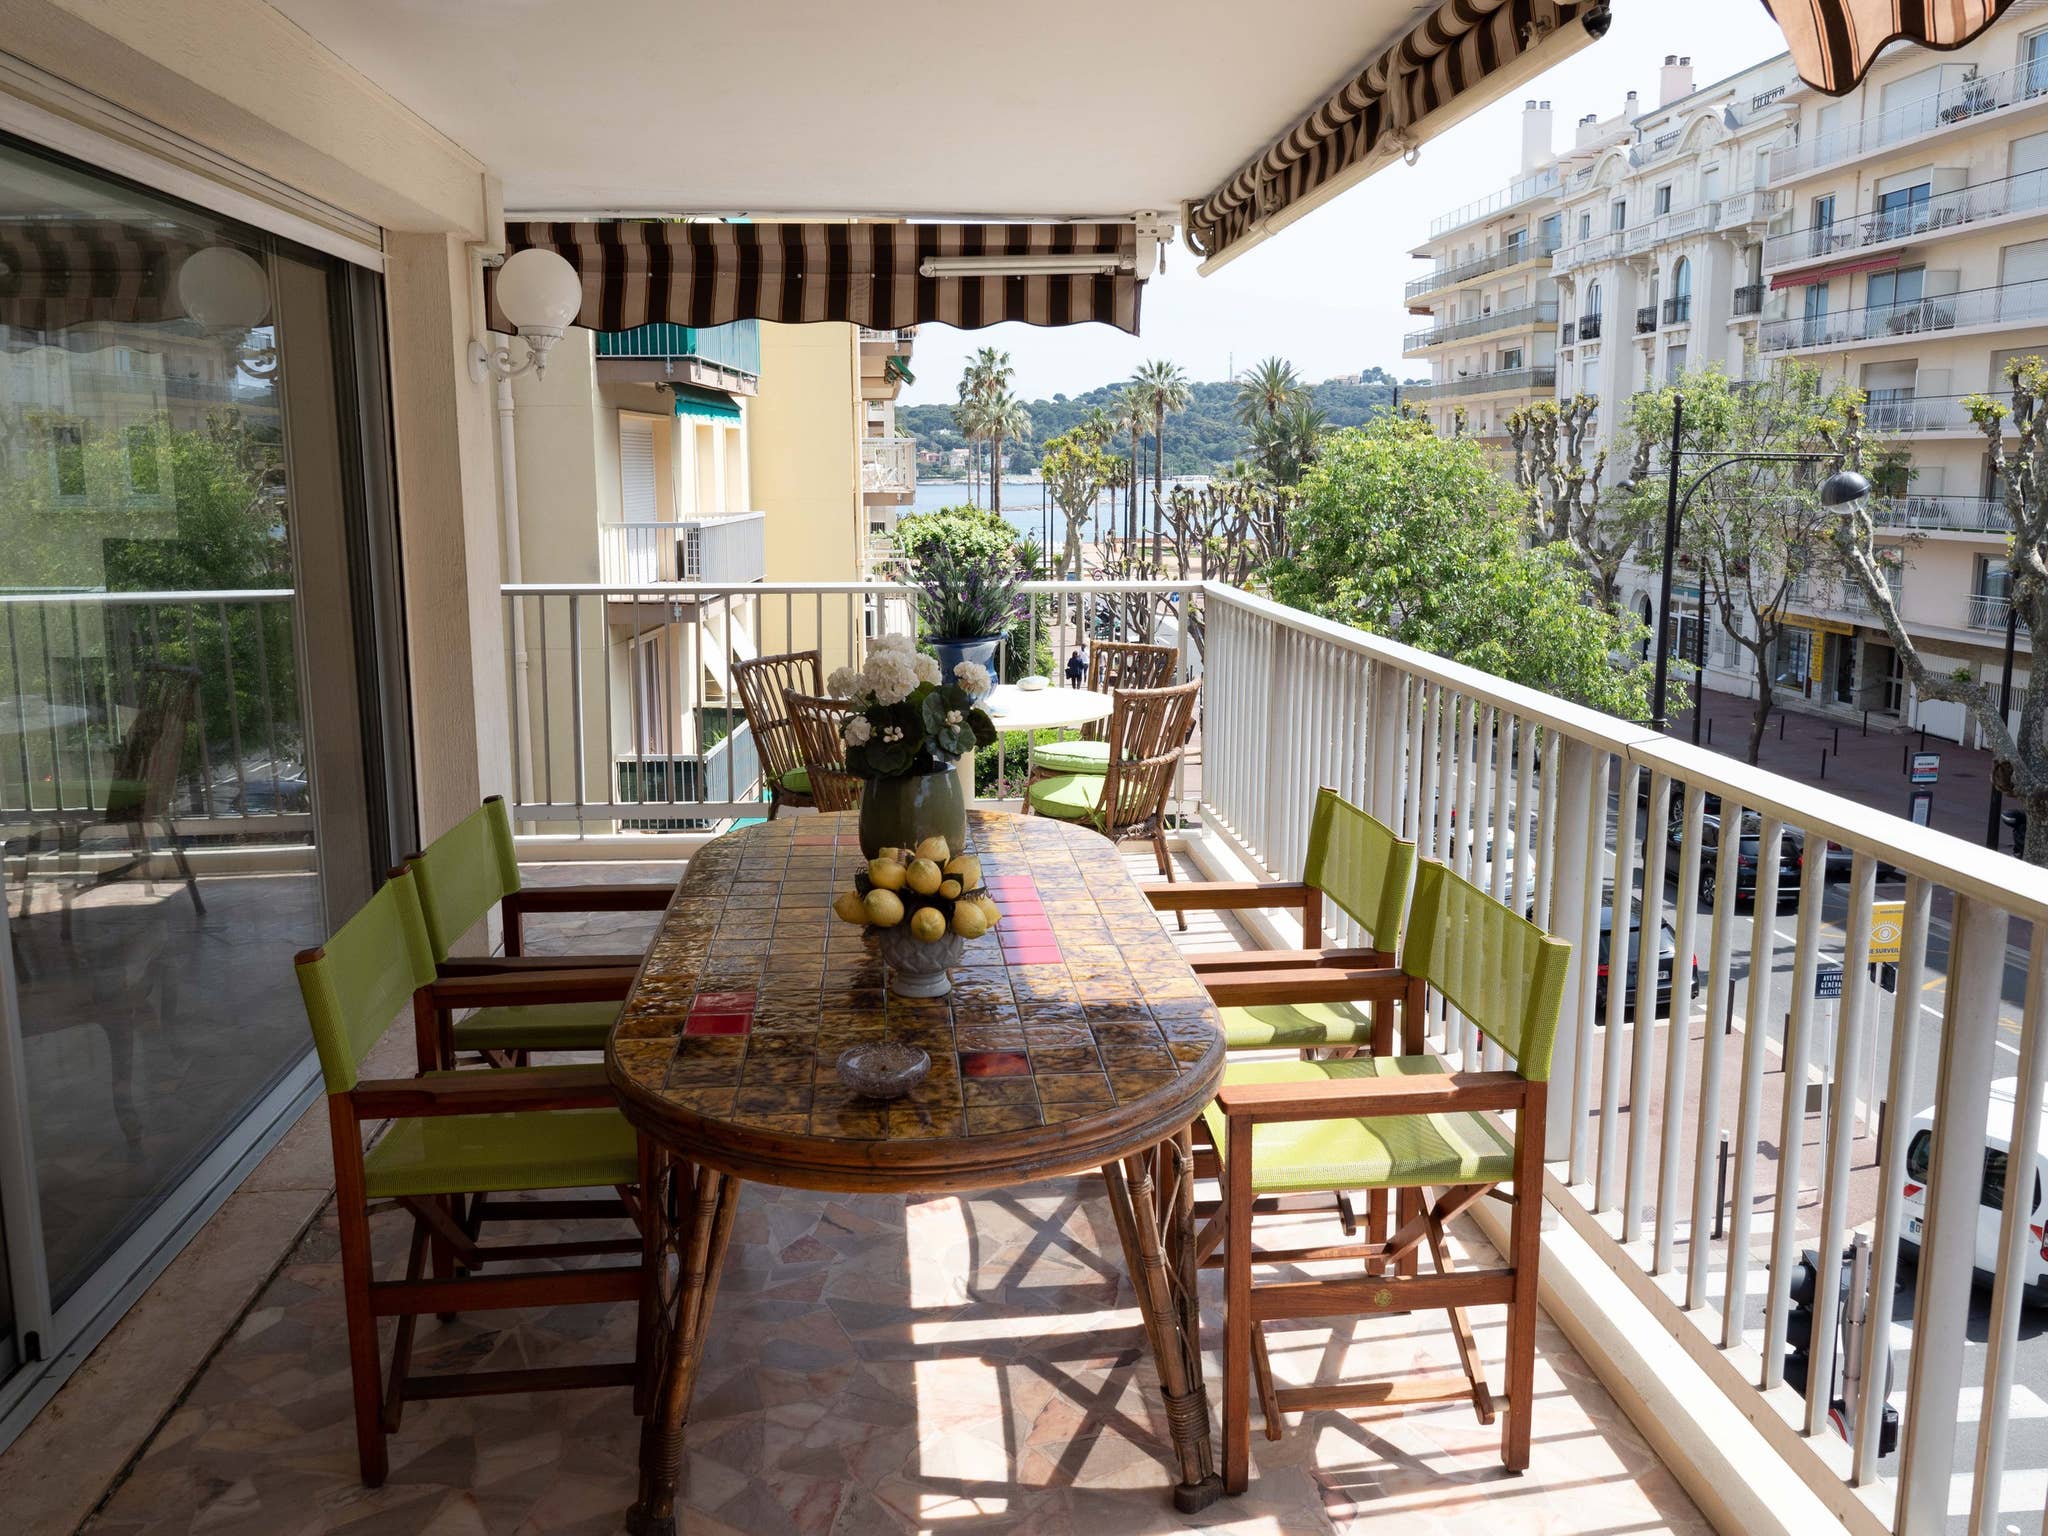 Property Image 2 - comfortable family flat in the heart of Antibes - by feelluxuryholidays